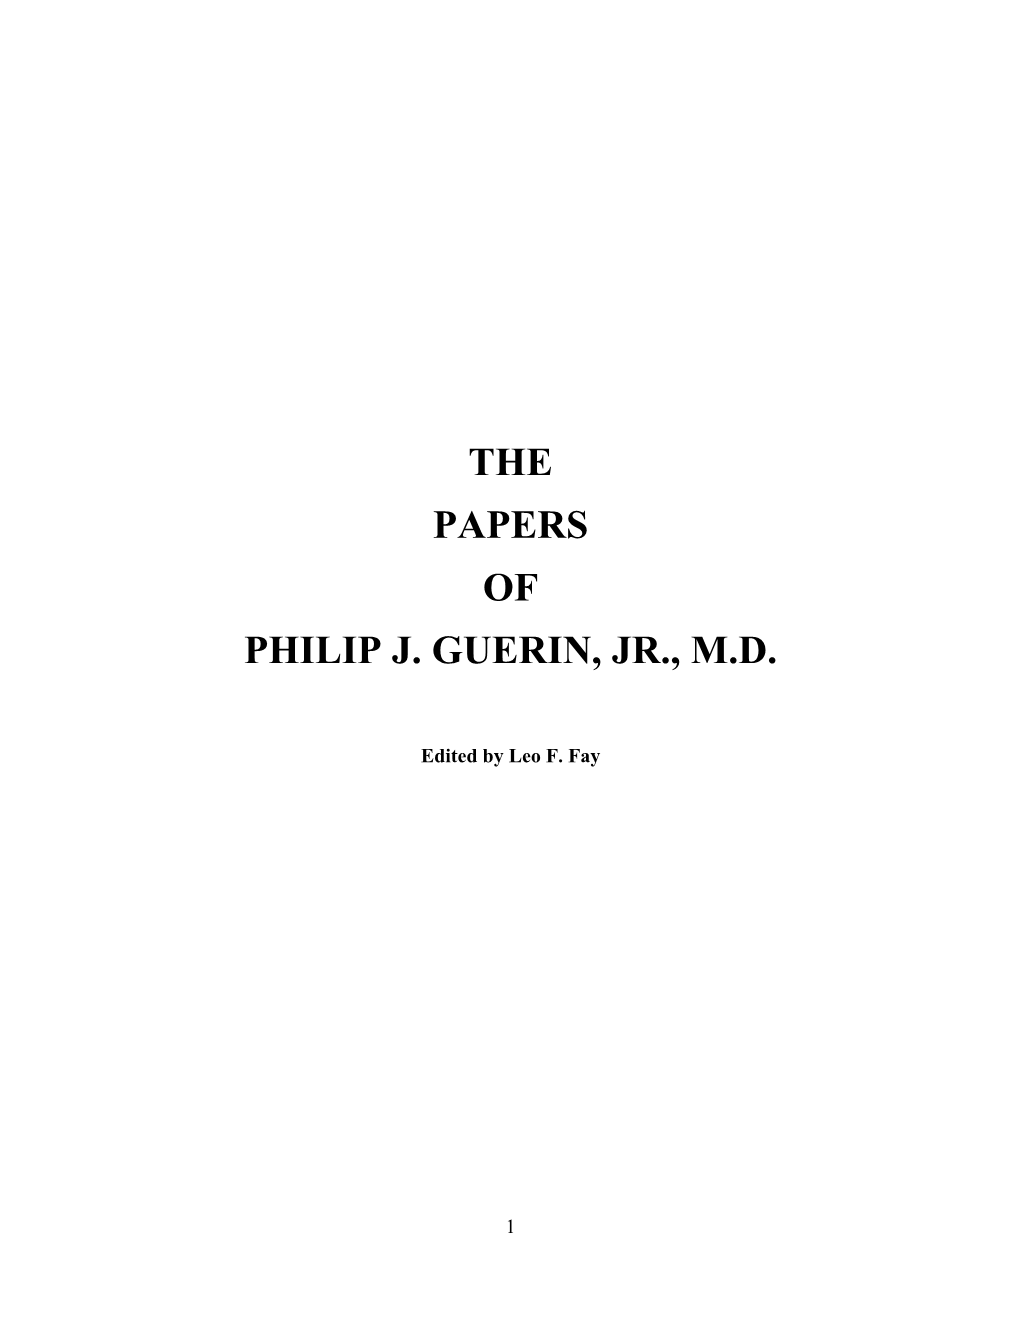 The Papers of Philip J. Guerin, Jr., M.D